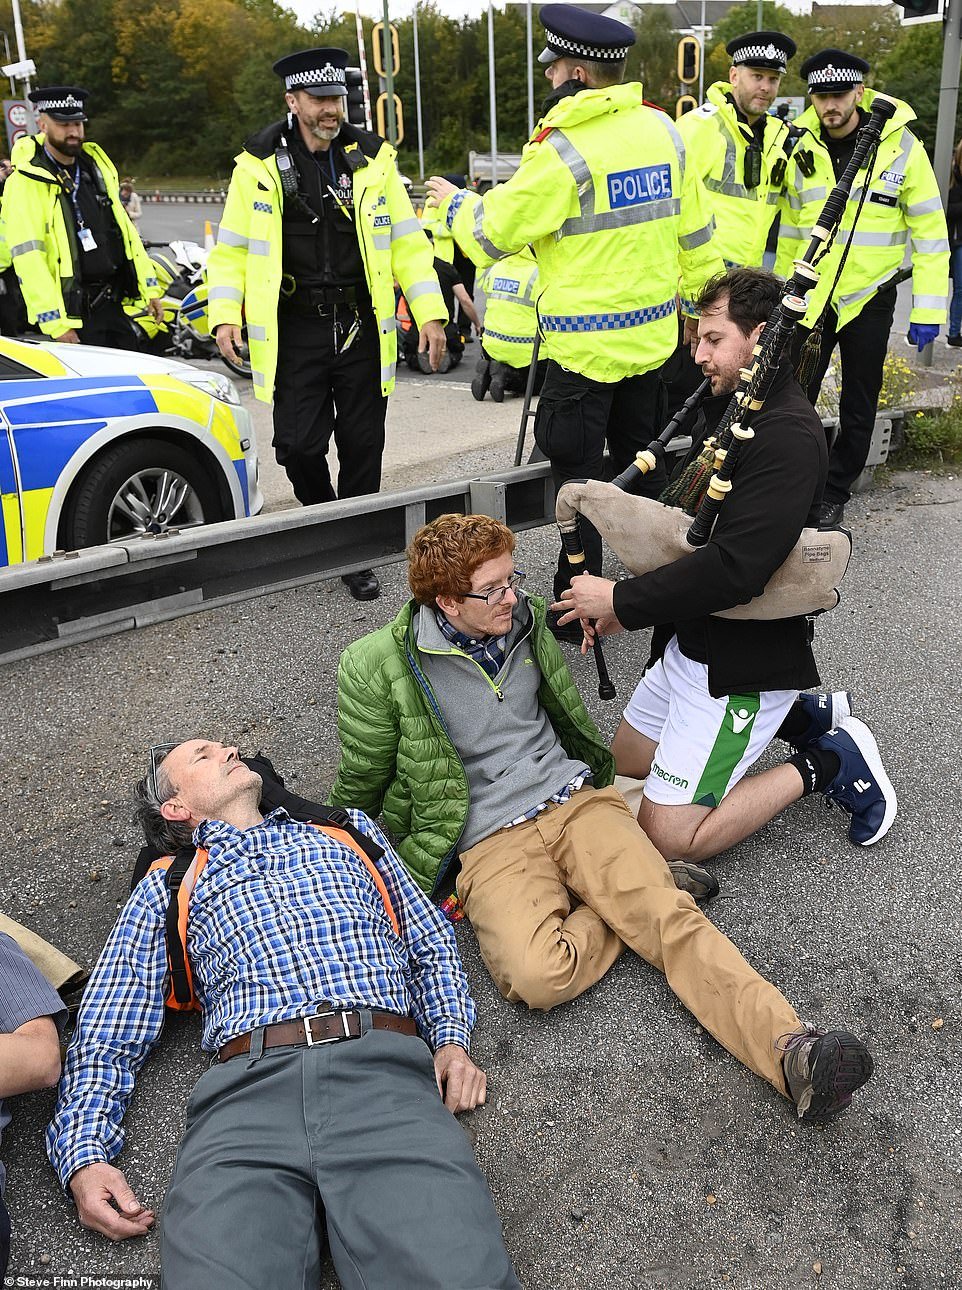 A man plays the bagpipes in the faces of Insulate Britain protesters sat on the road near the M25 Dartford Crossing today